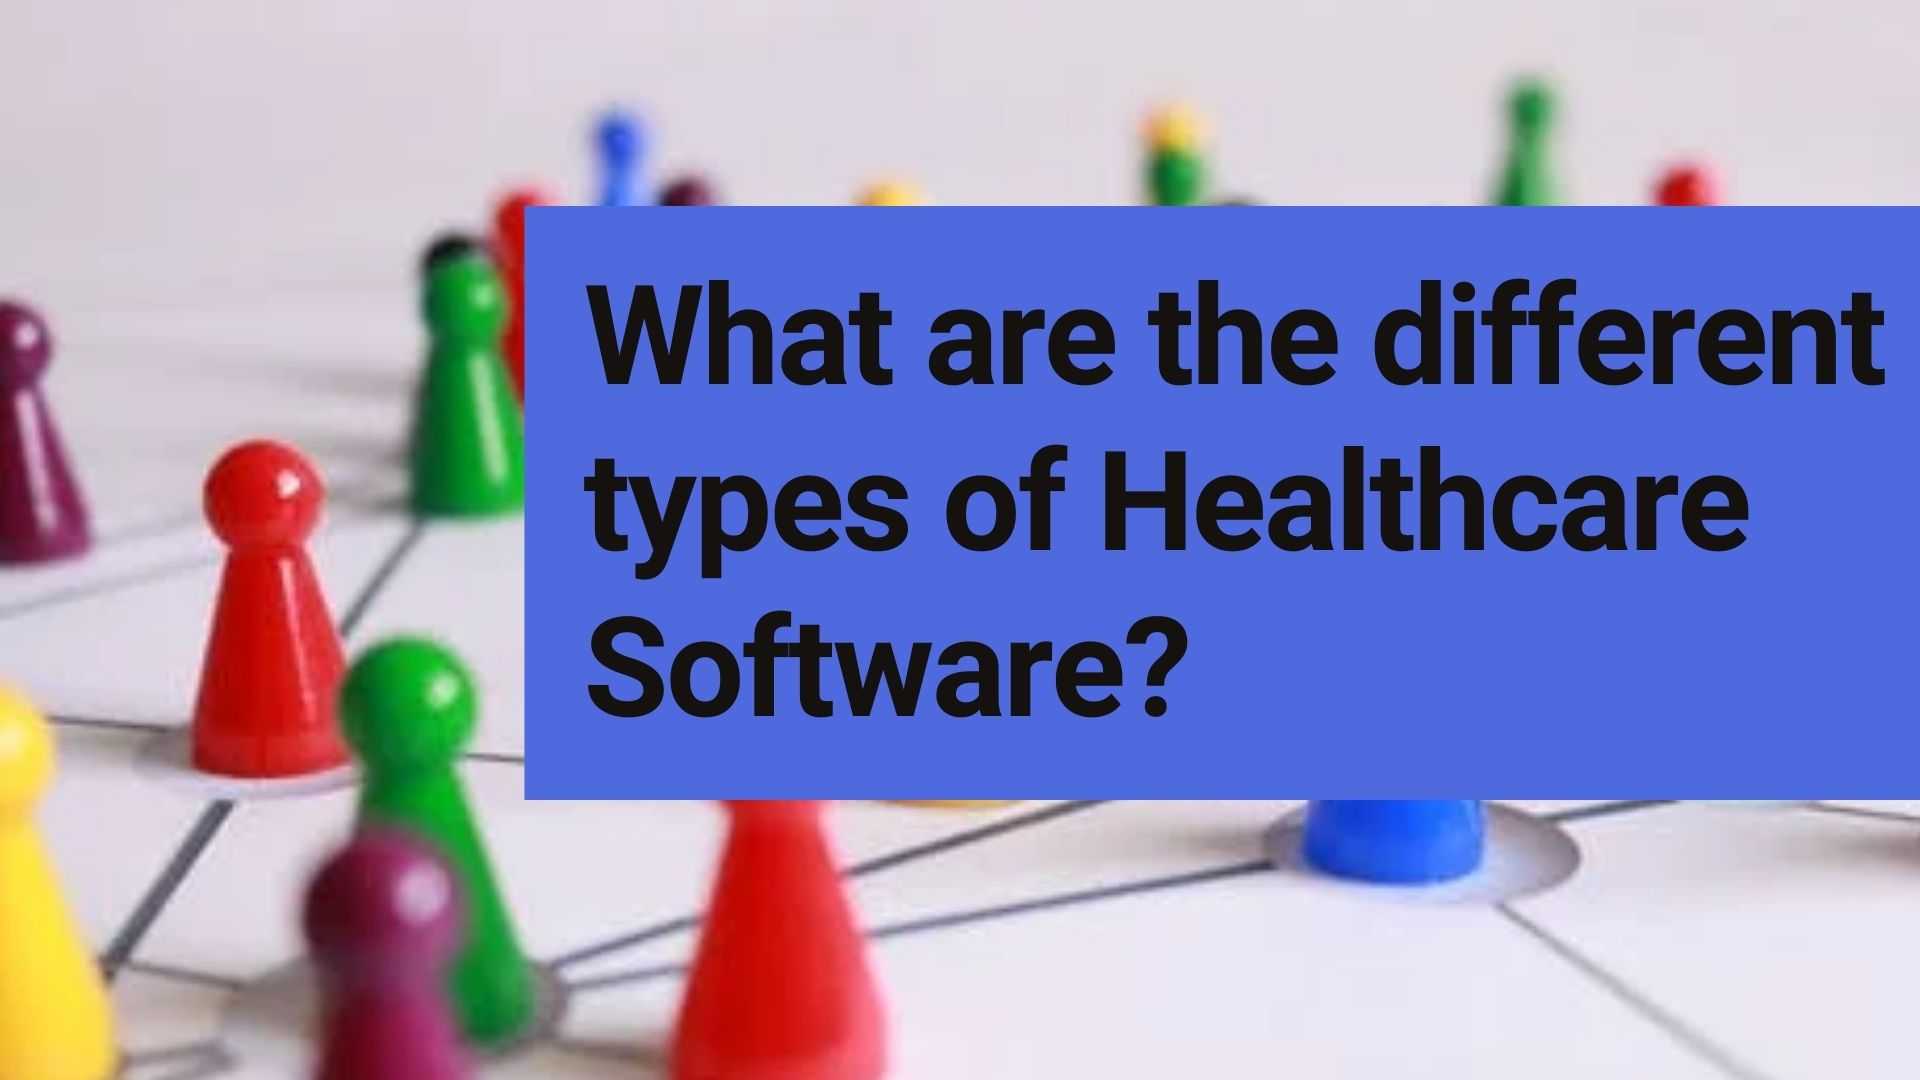 What are the different types of Healthcare Software?